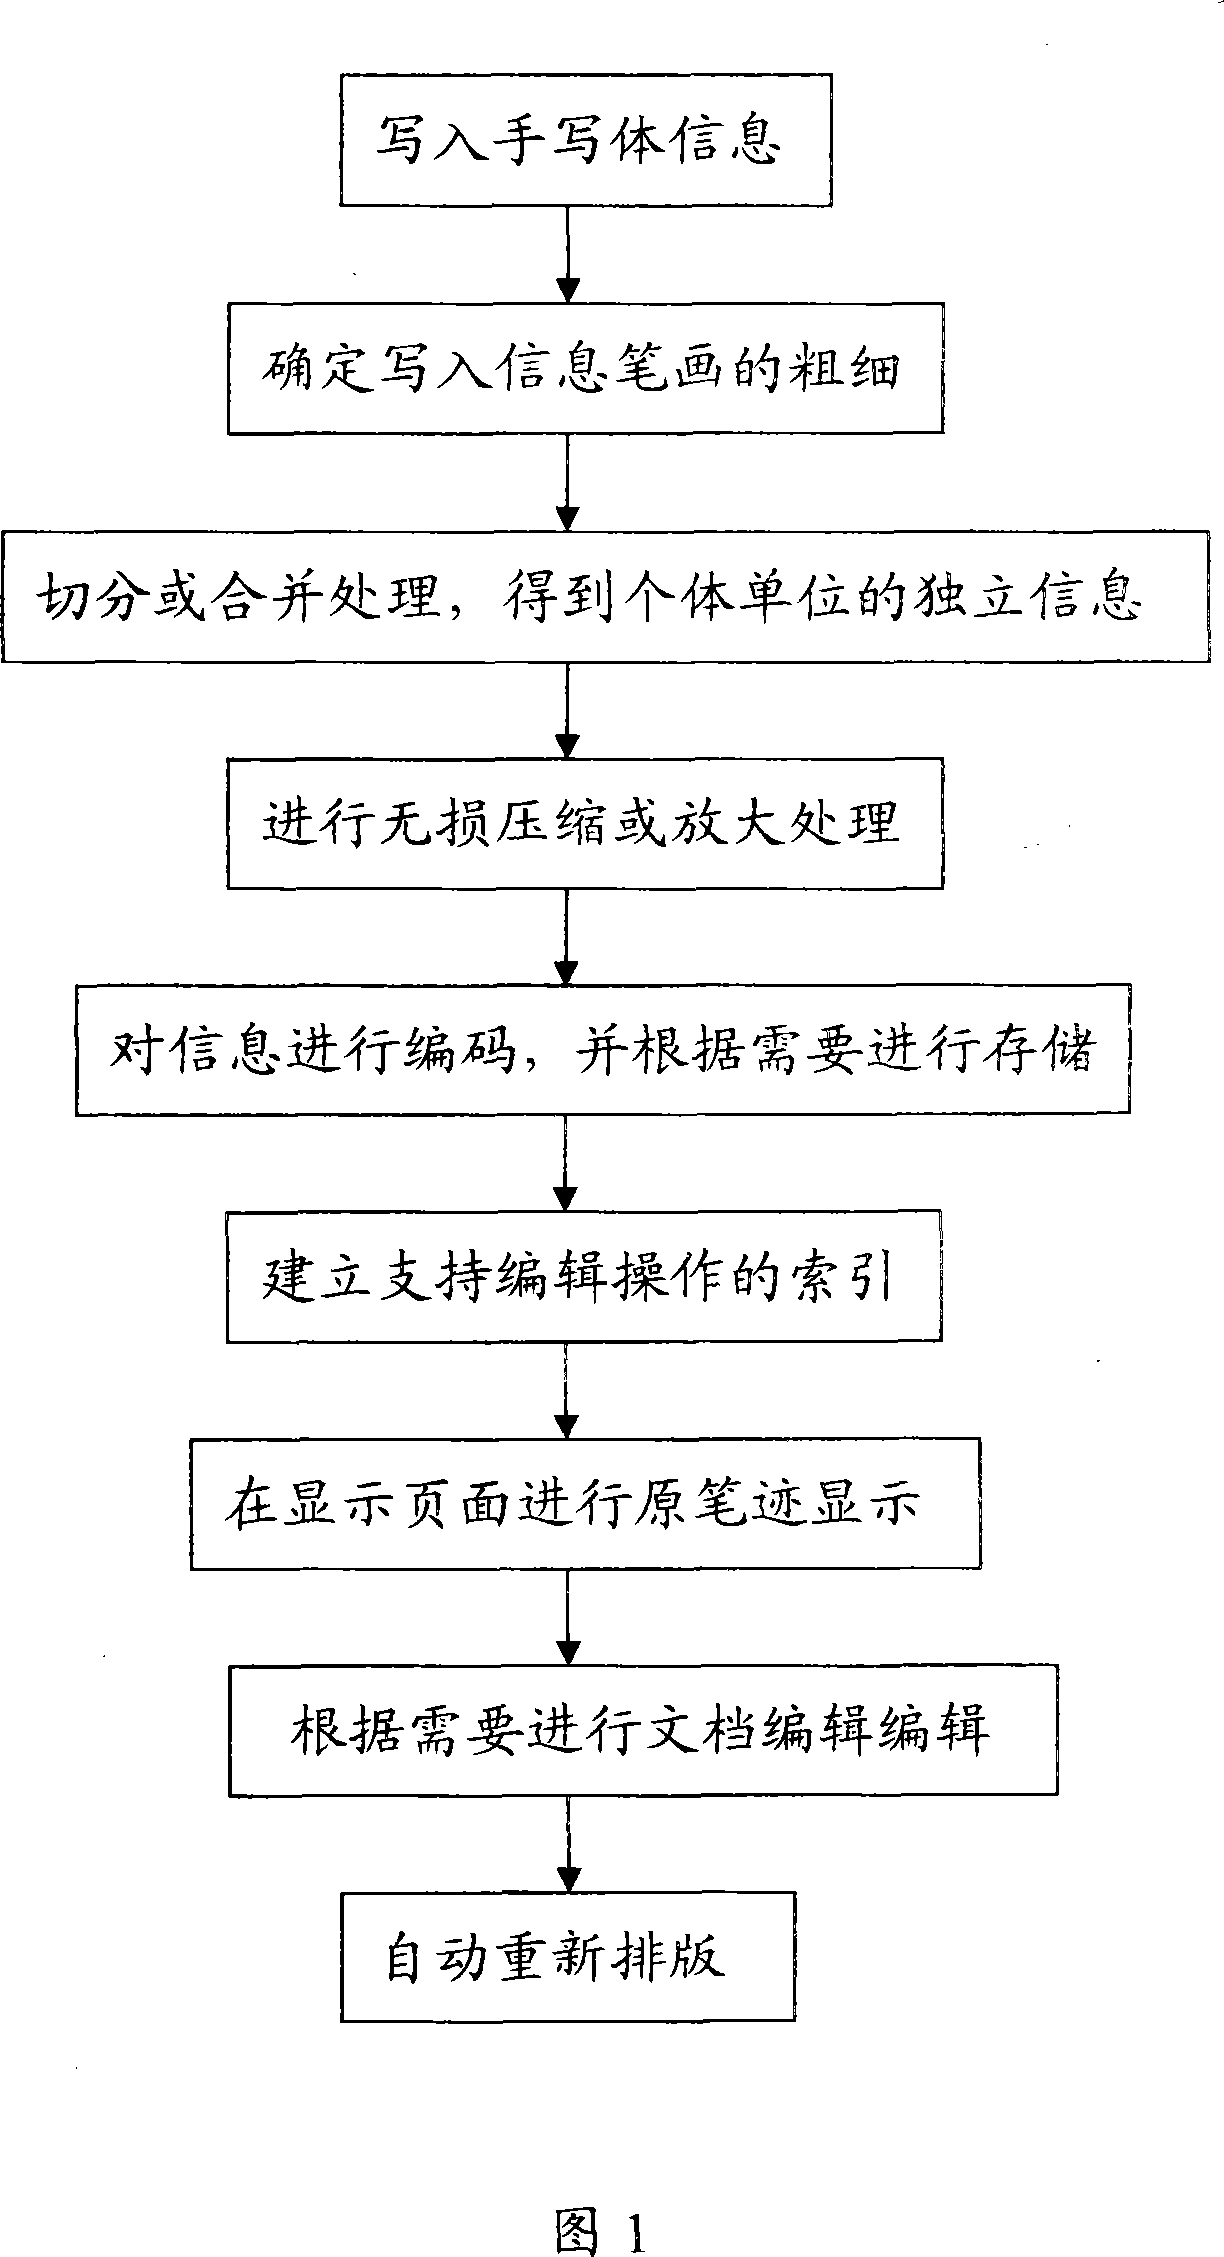 Method for directly writing handwriting information